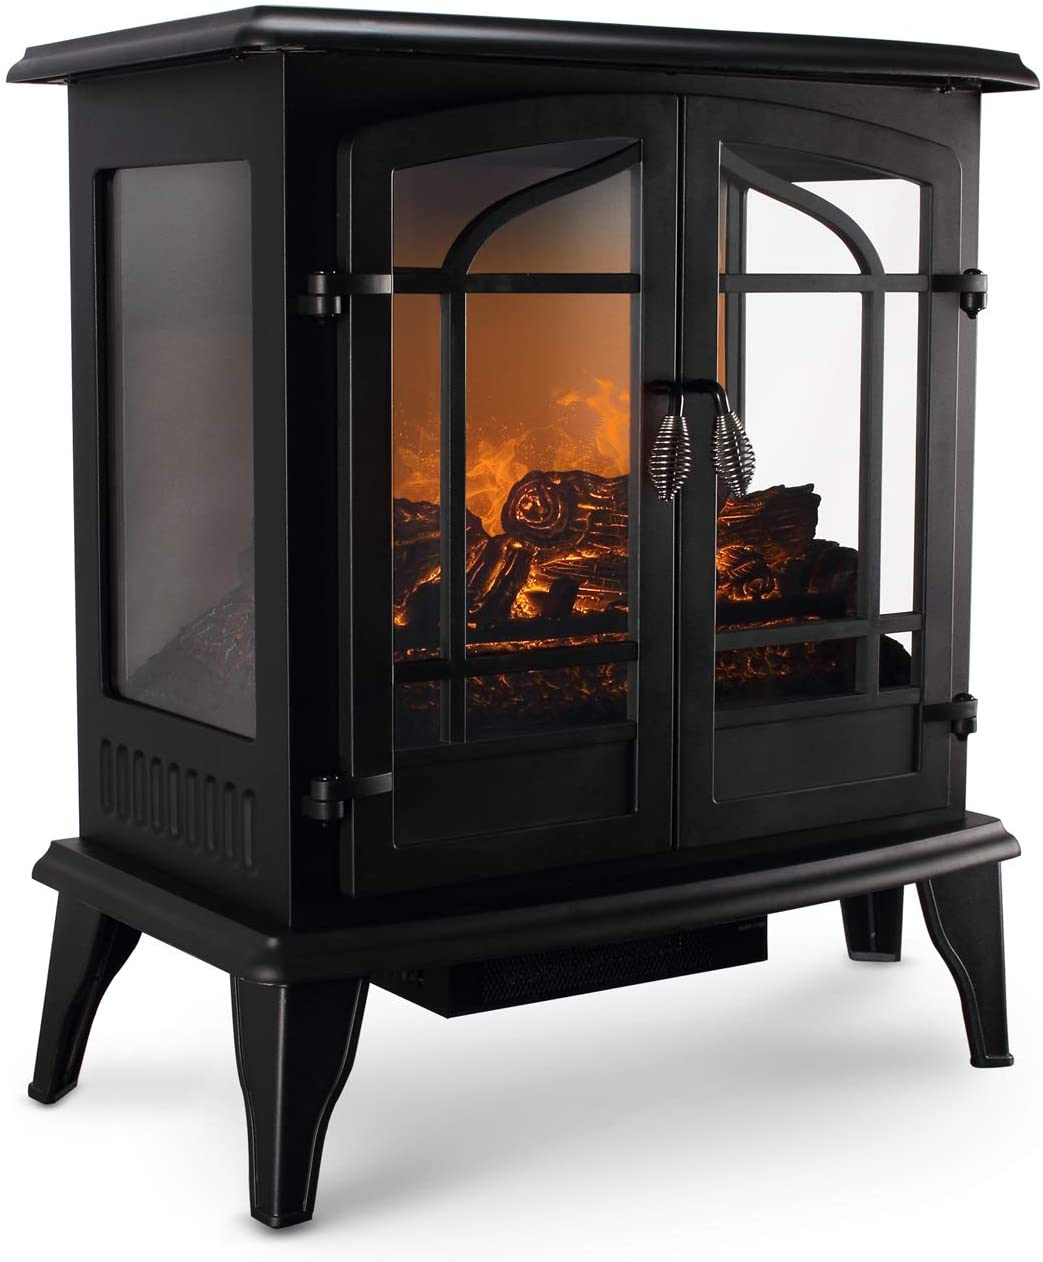 Portable Indoor Fireplace Elegant Della 3d Infrared Electric Vintage Fireplace Stove Black 25 Inch Portable Indoor Space Heater 1400w Burning Wood Screen